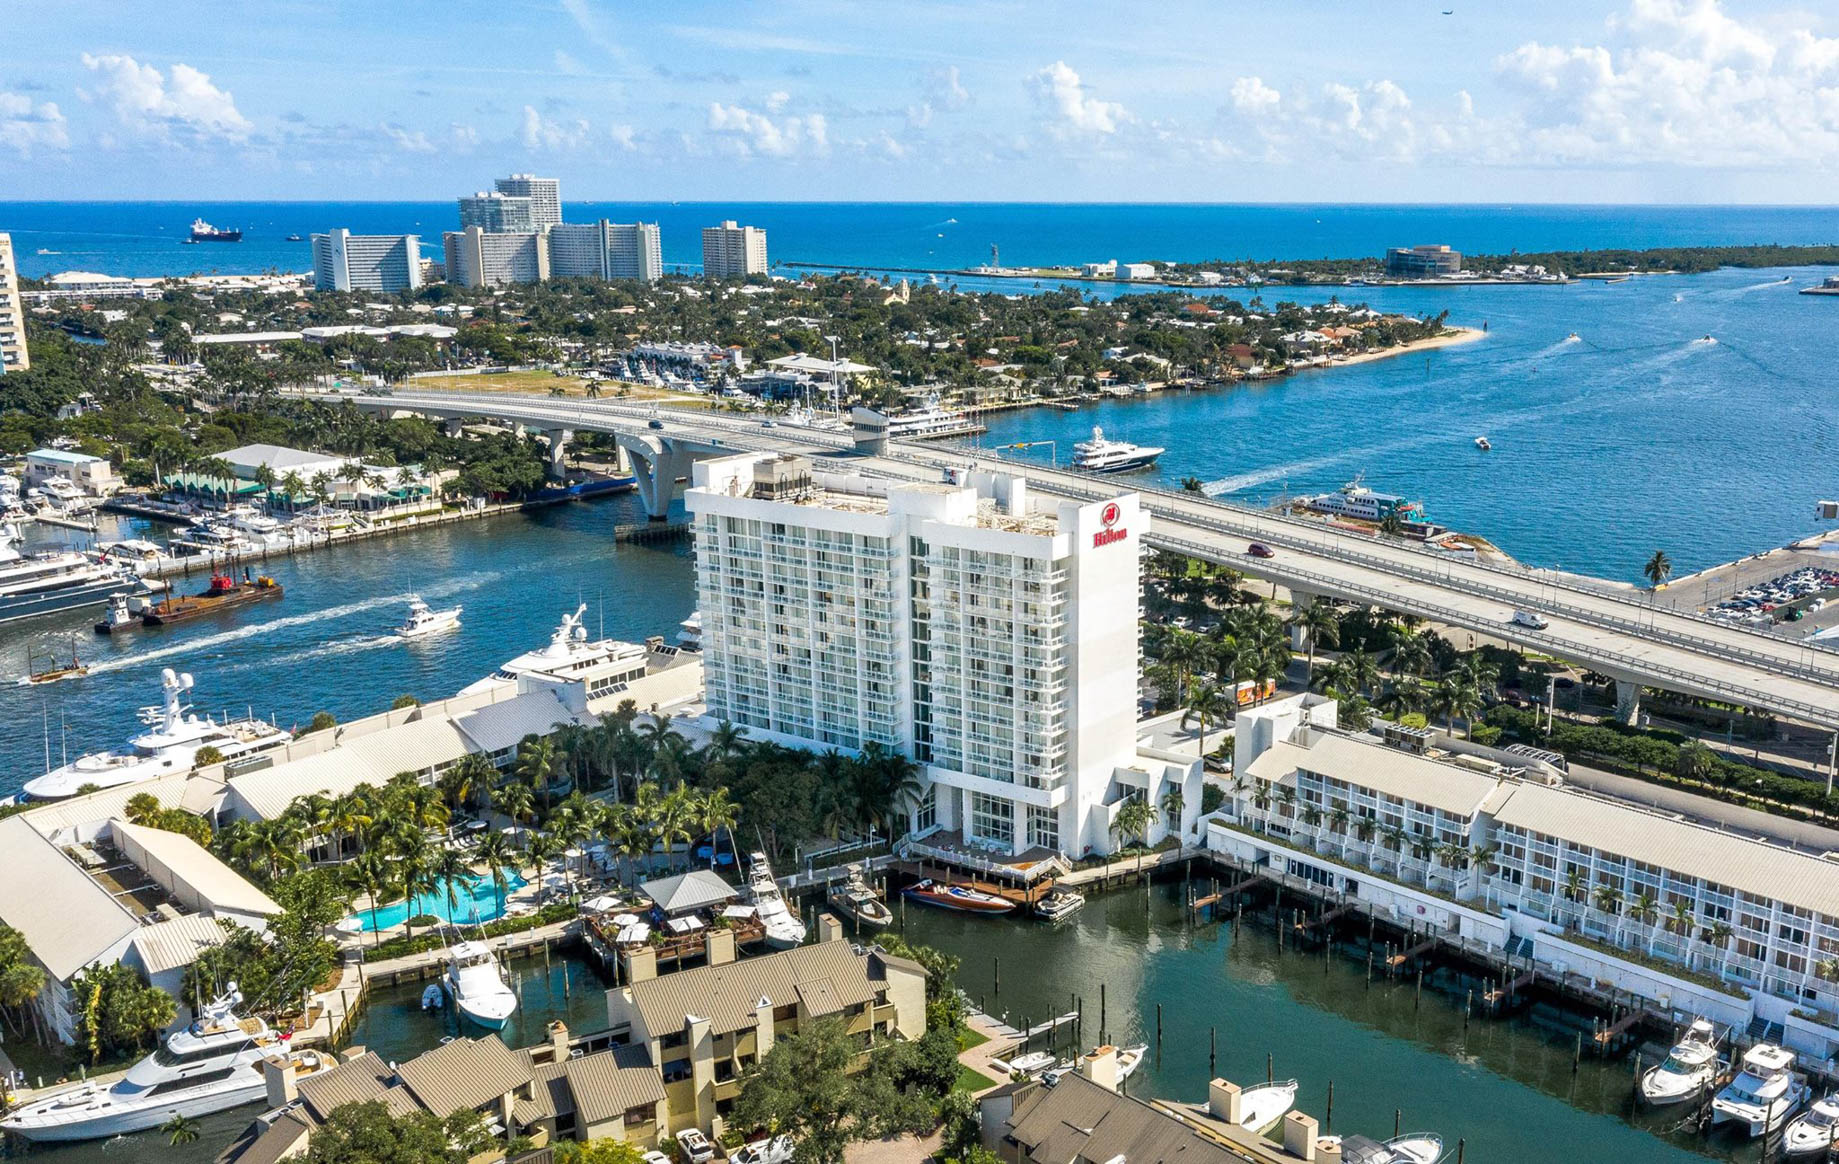 Five of the Best Hotels to Stay in While Attending the Fort Lauderdale International Boat Show - Hilton Fort Lauderdale Marina